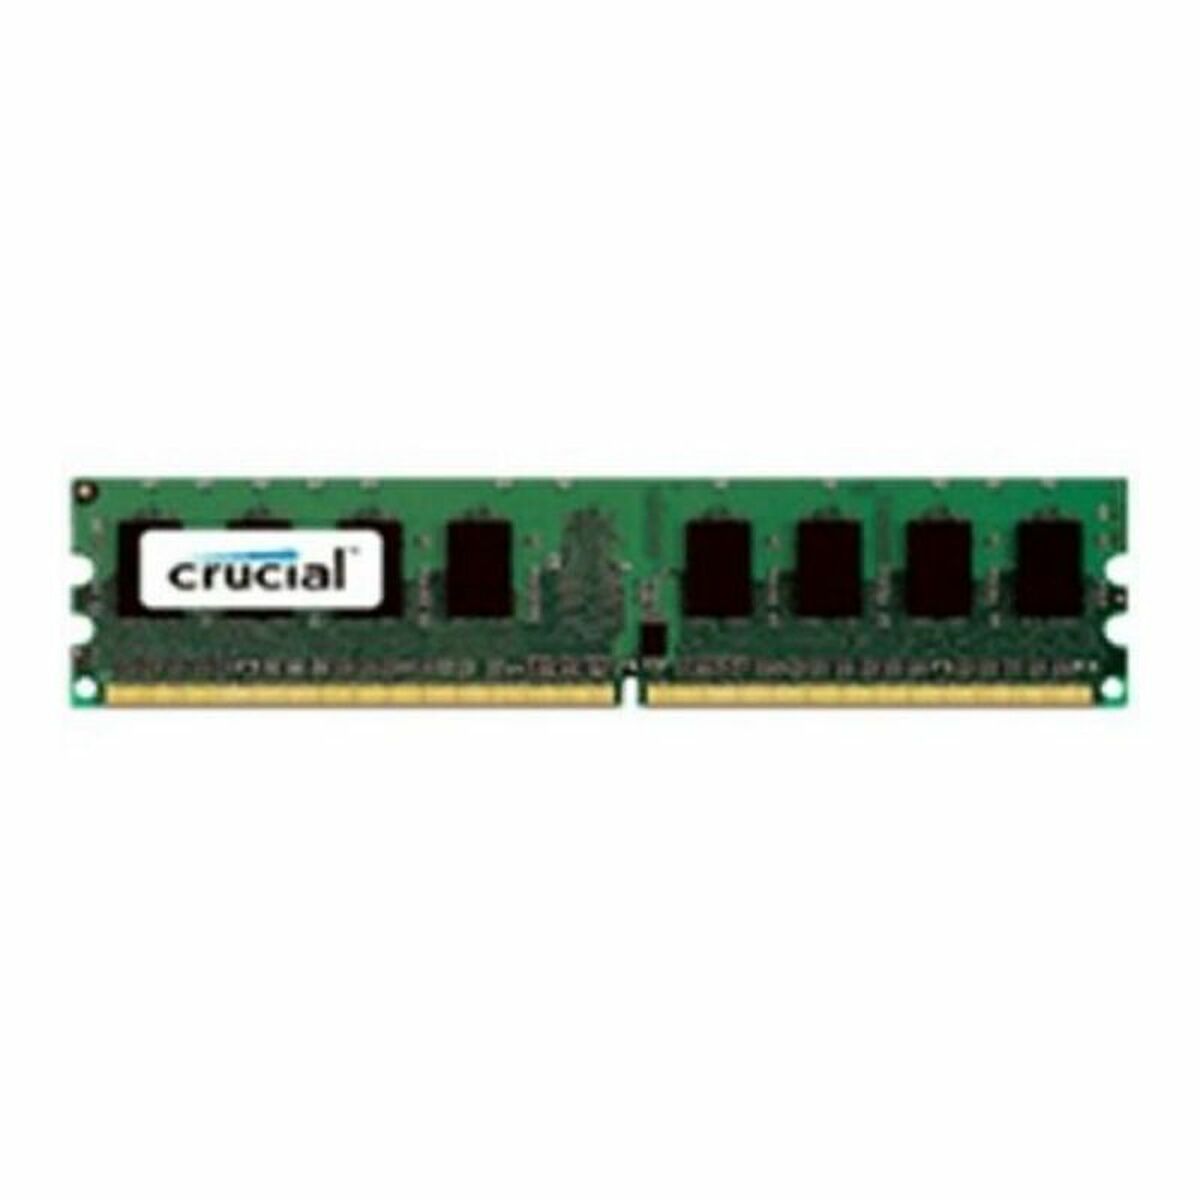 Mémoire RAM Crucial IMEMD20049 CT12864AA800 1GB DDR2 800 MHz pc2-6400